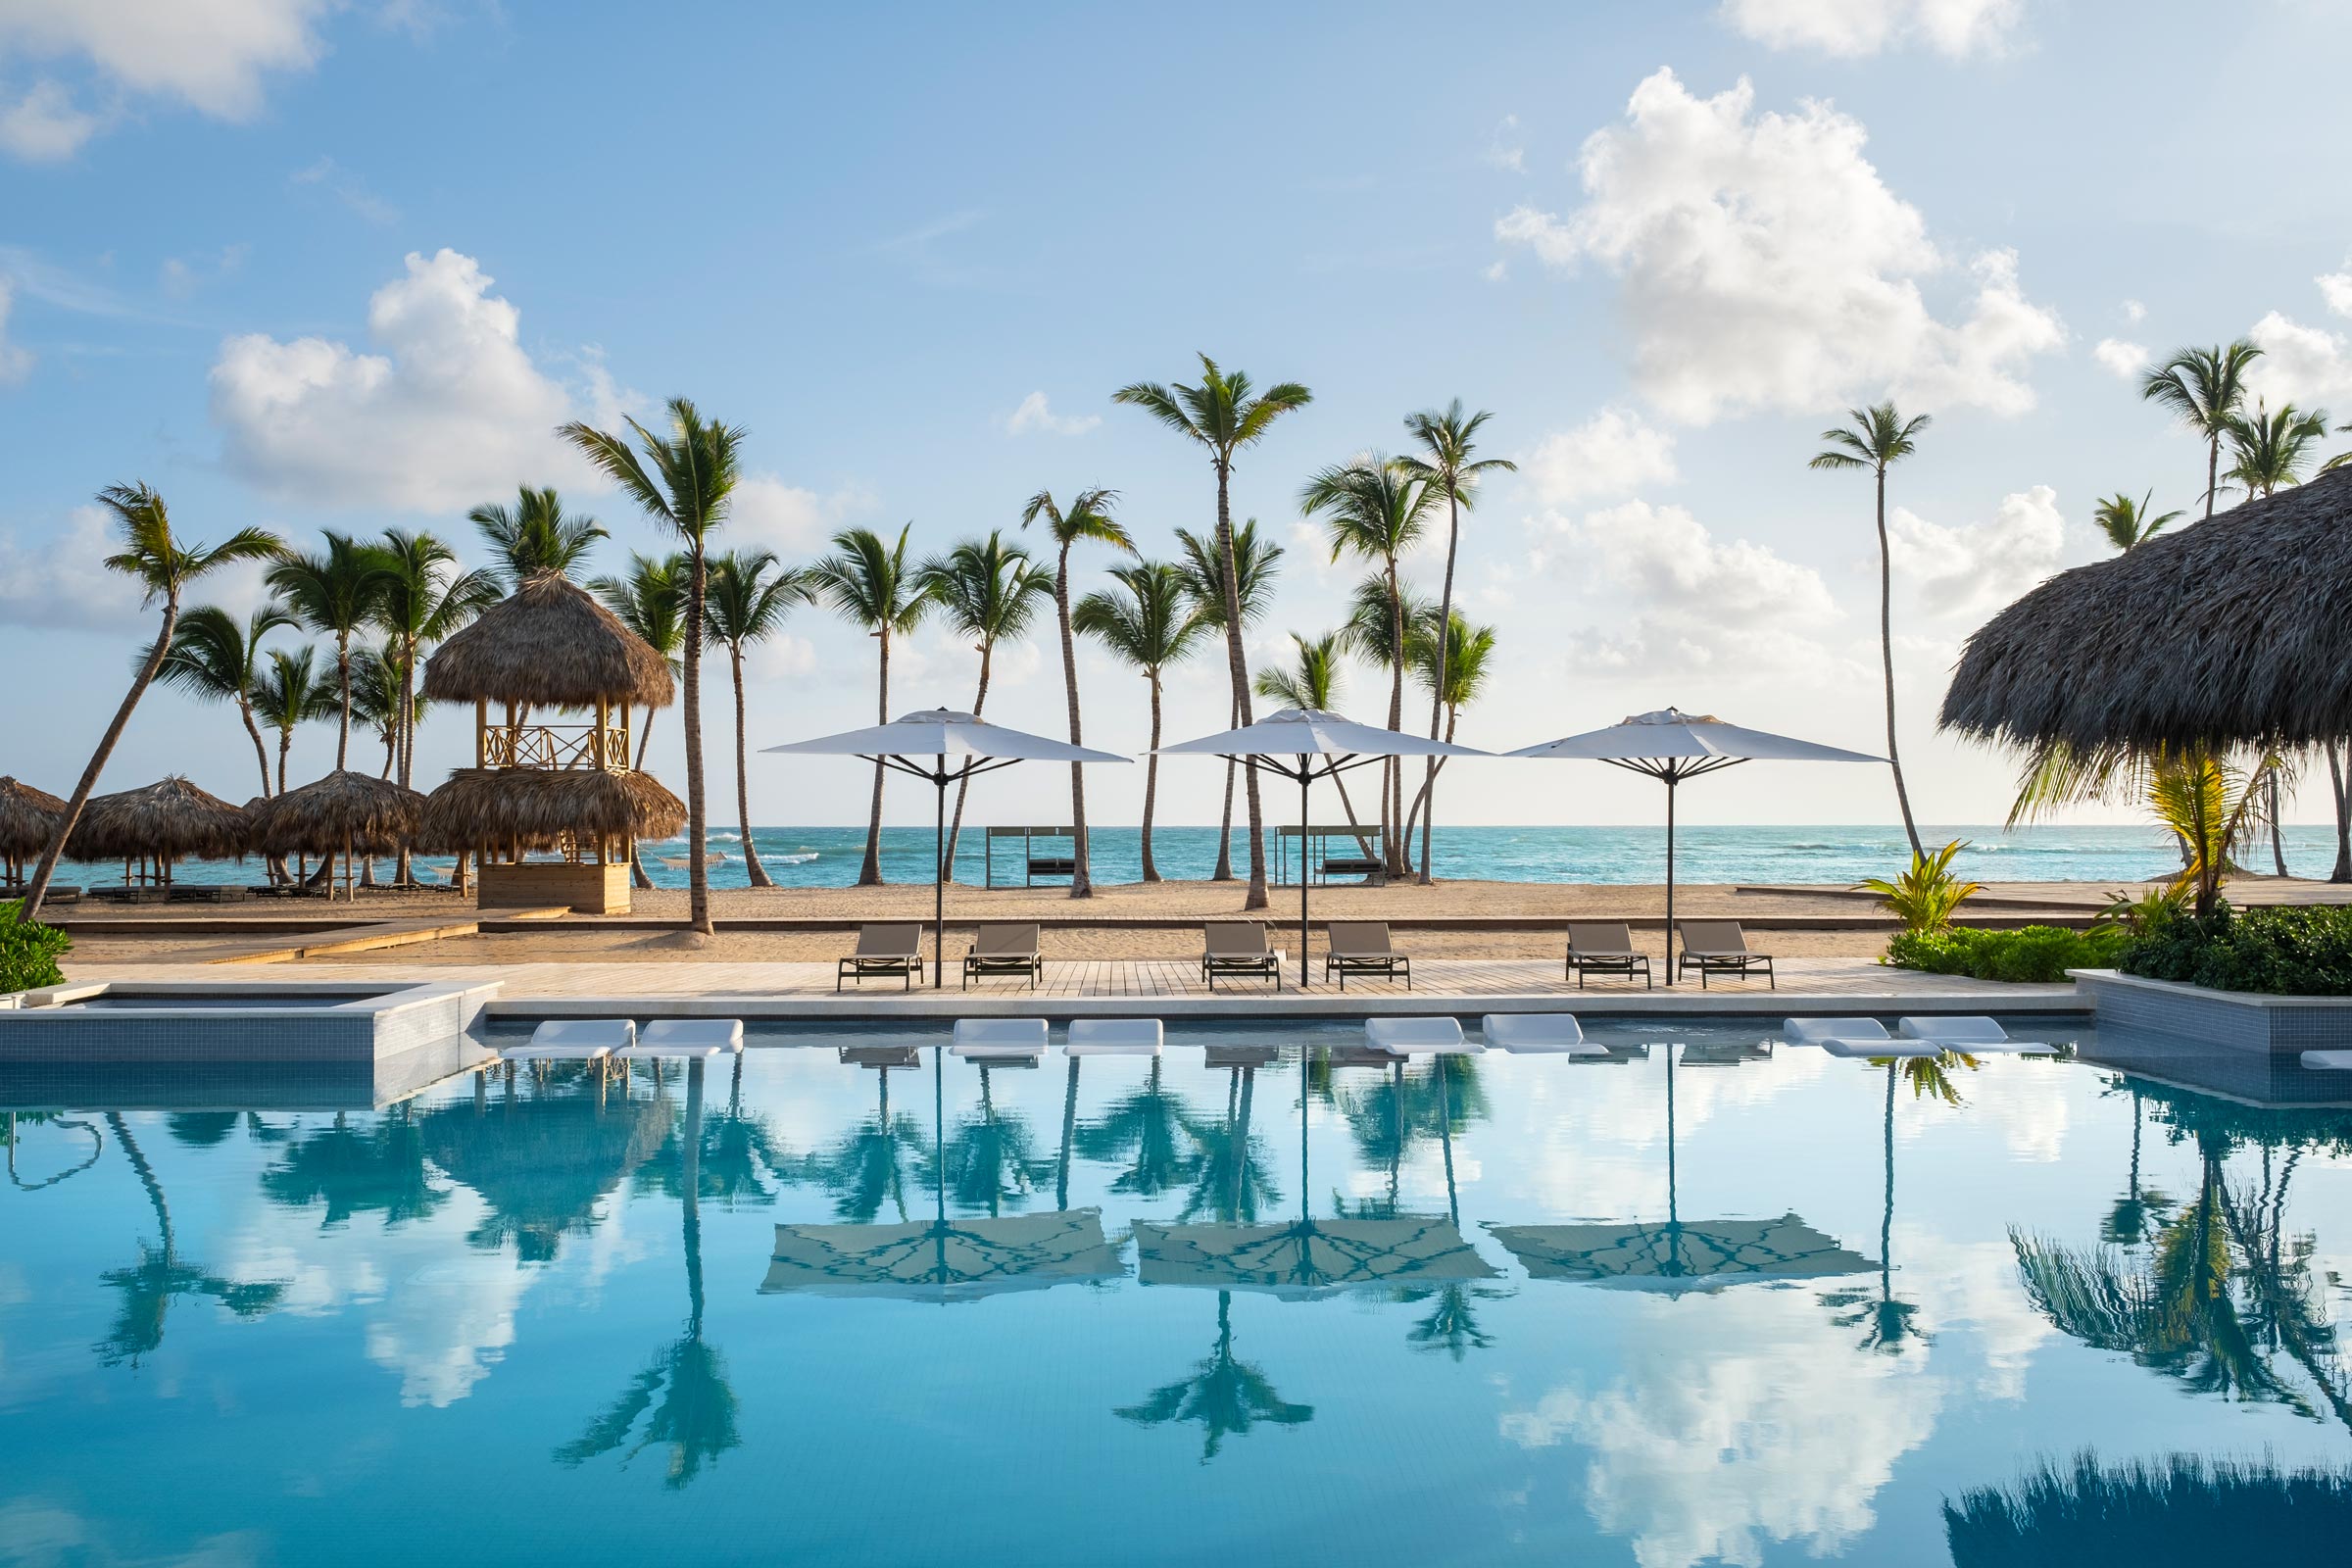 The Best Caribbean Vacation in Punta Cana